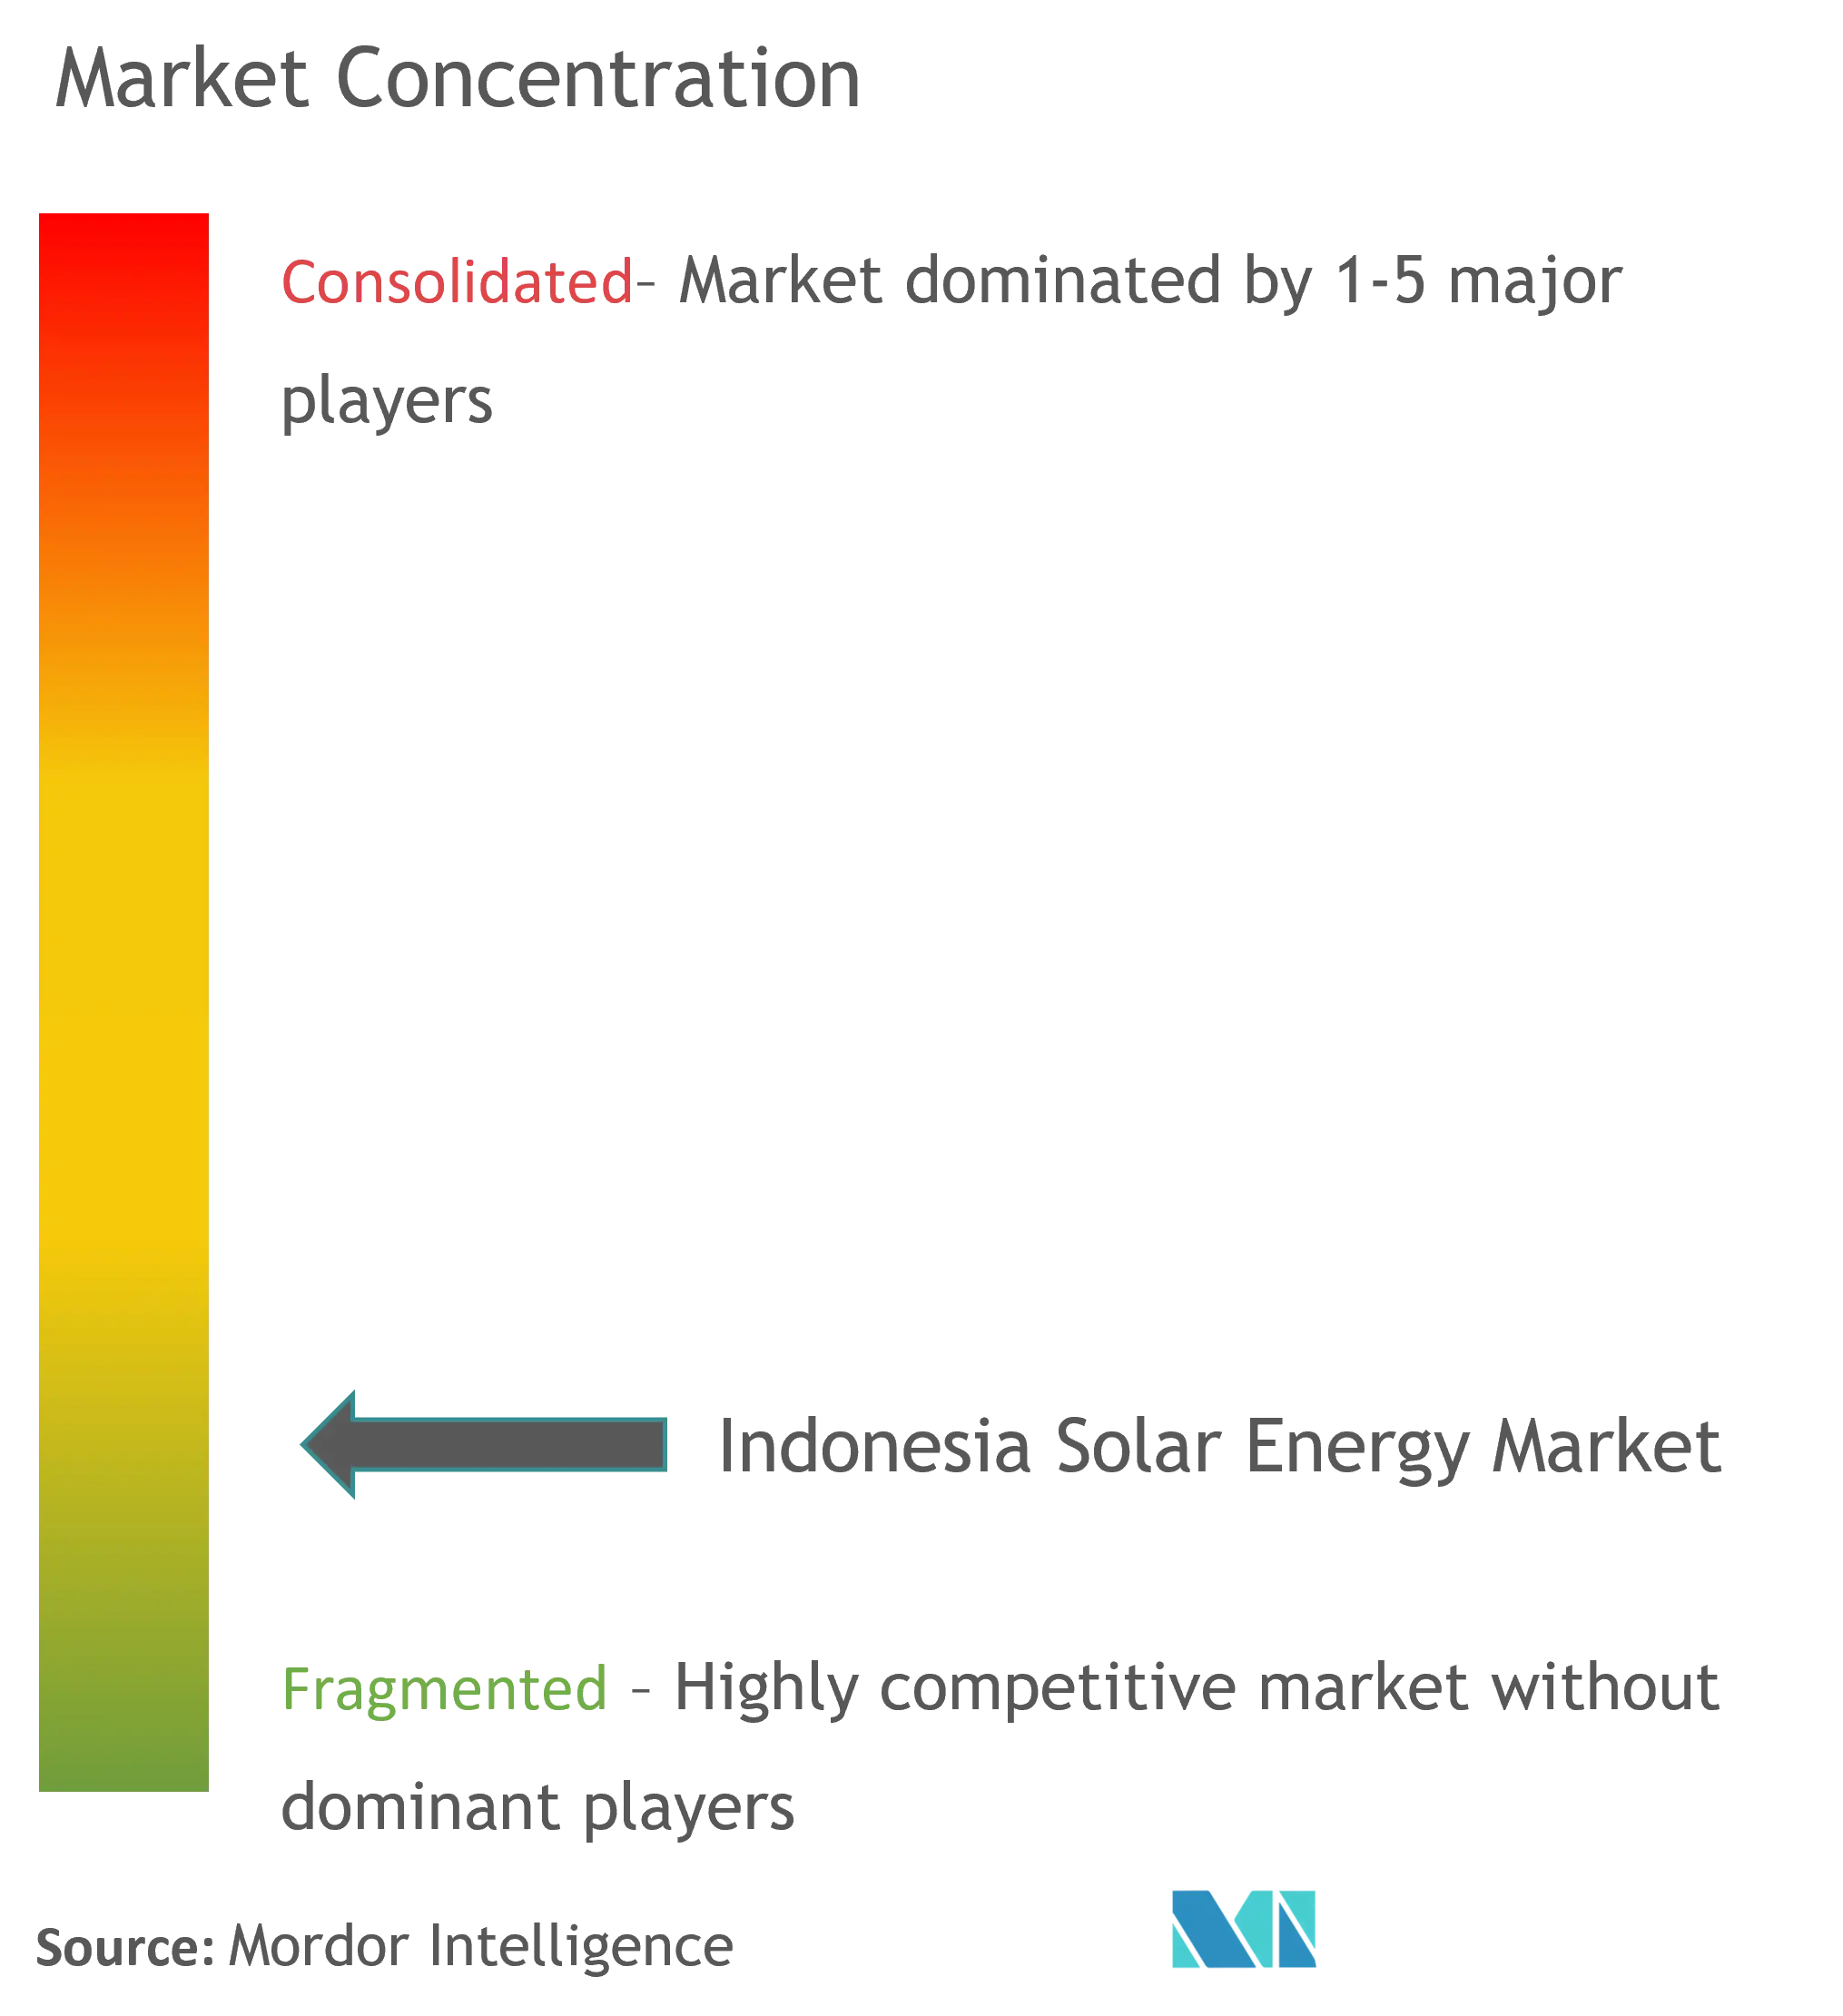 Market Concentration-Indoesia Solar Energy Market.png